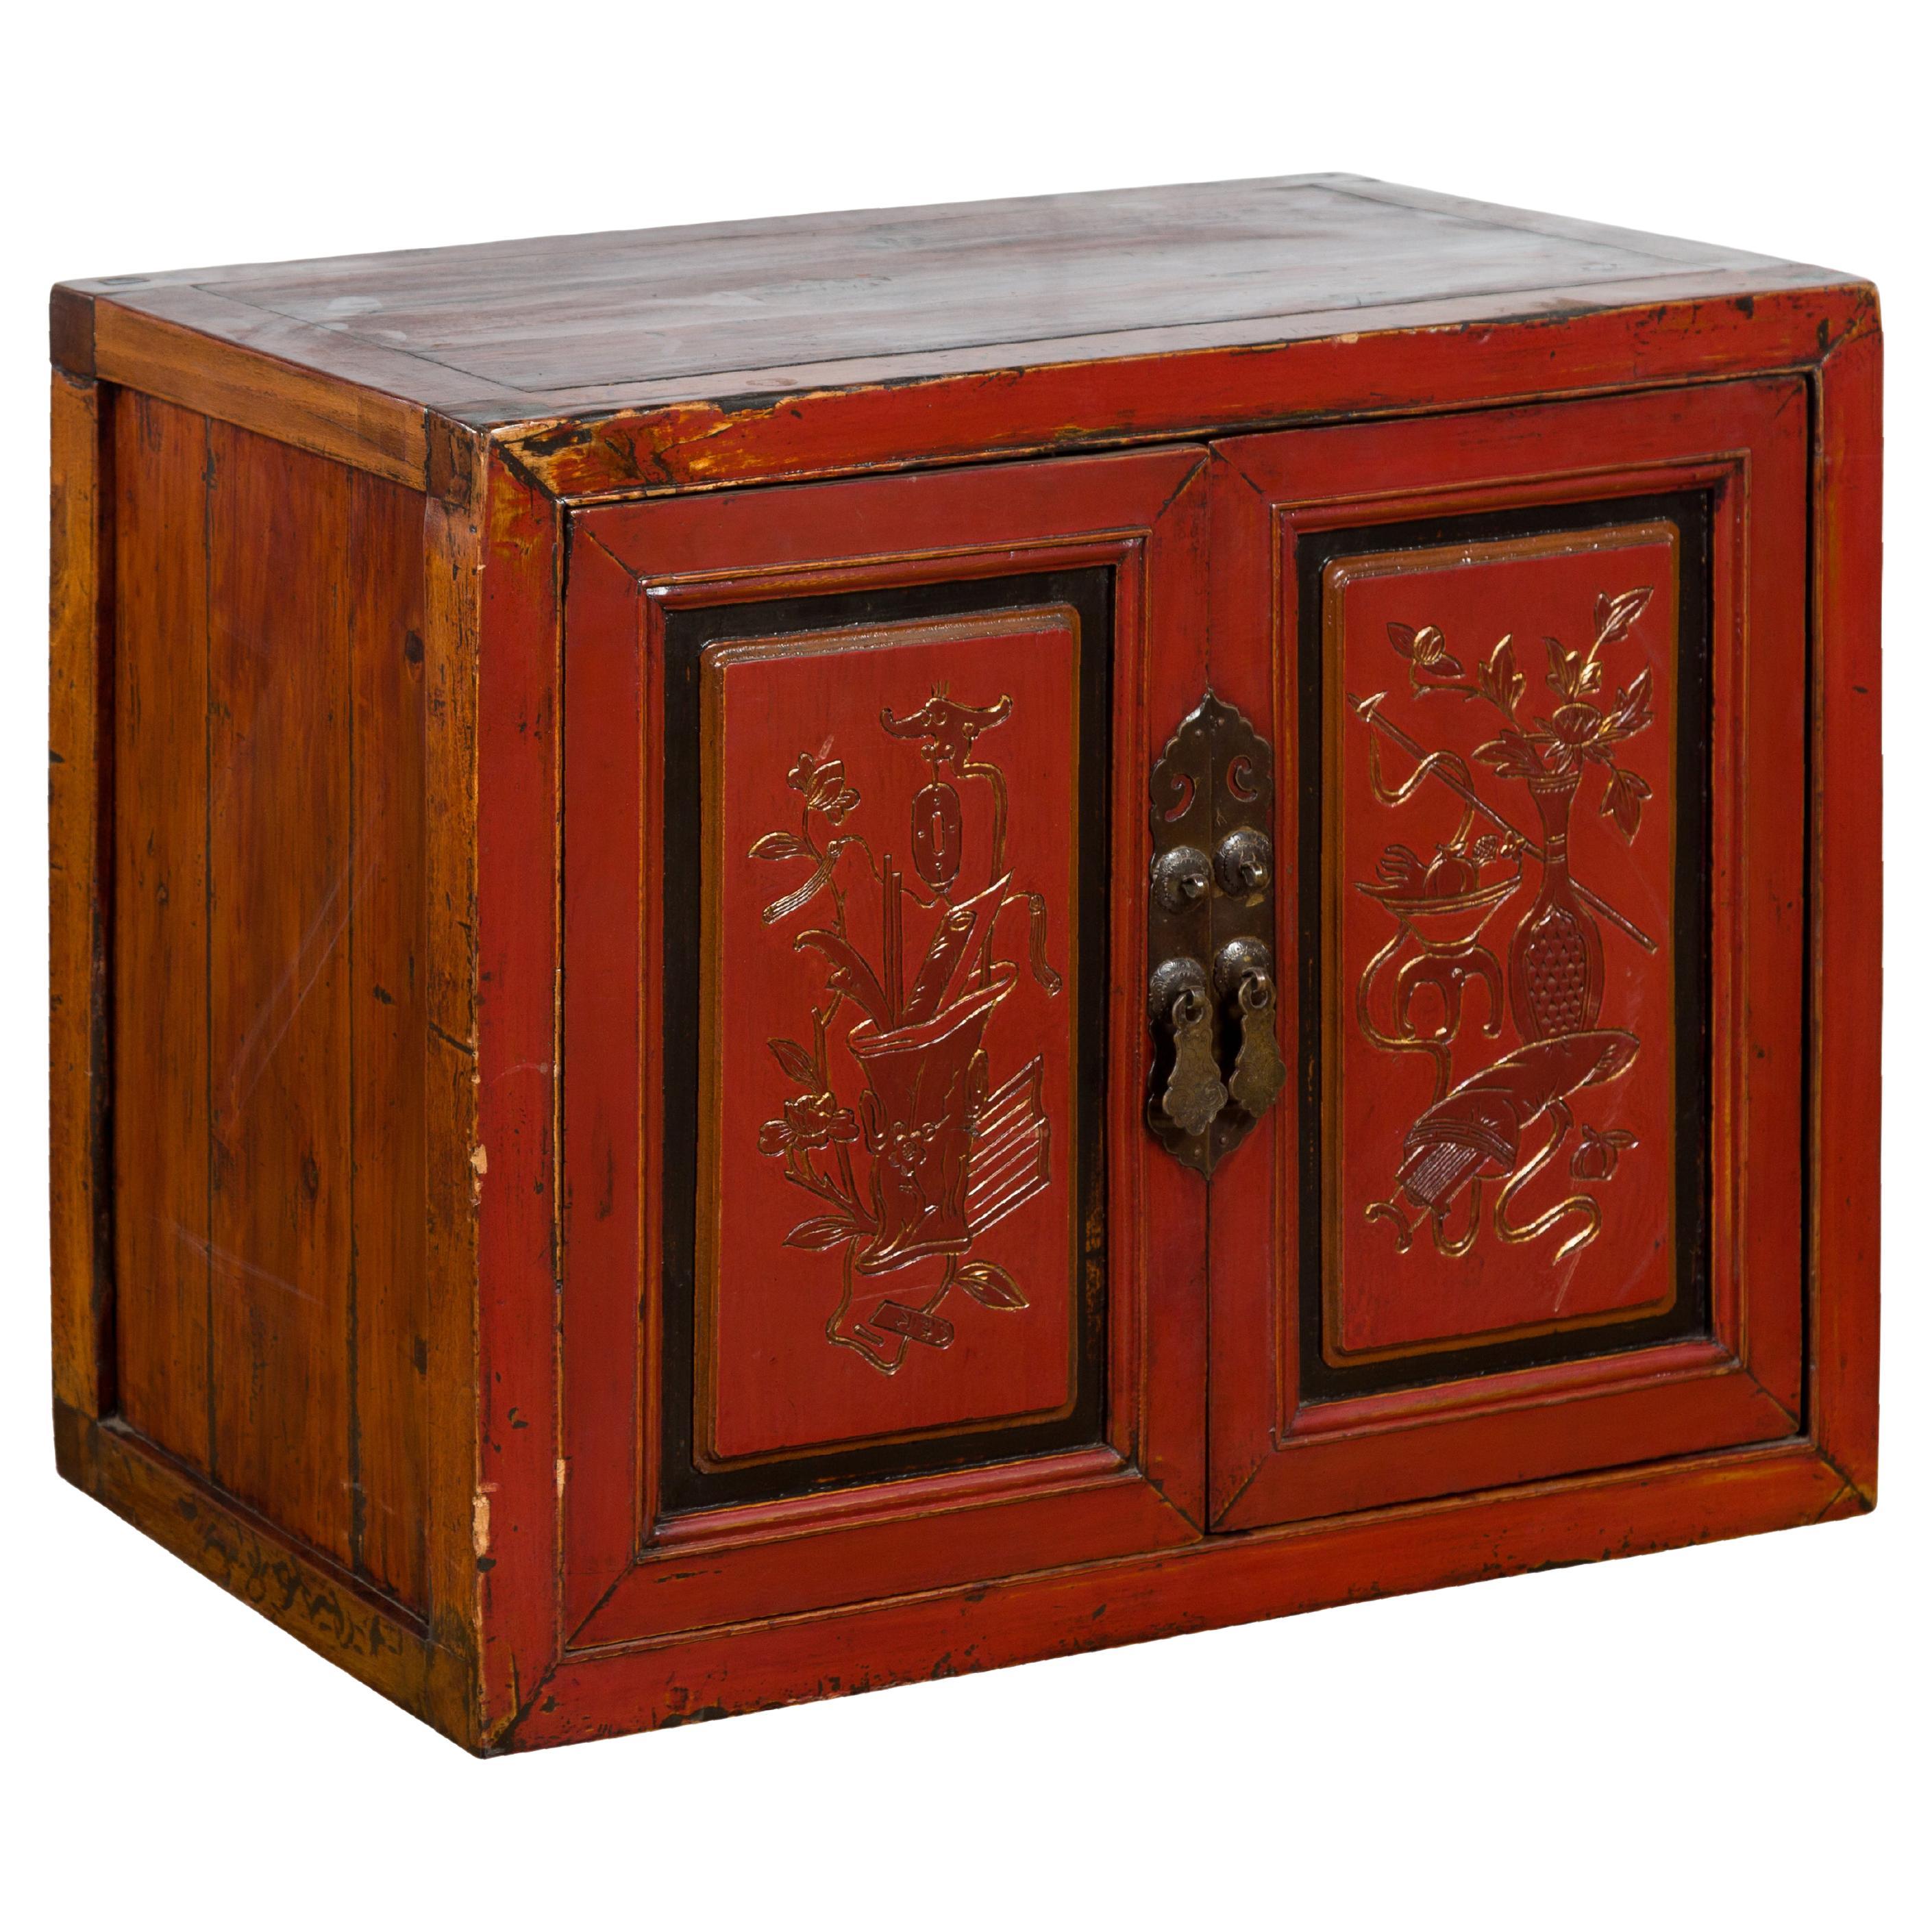 19th Century Chinese Qing Dynasty Red Lacquer Cabinet with Hand-Carved Doors